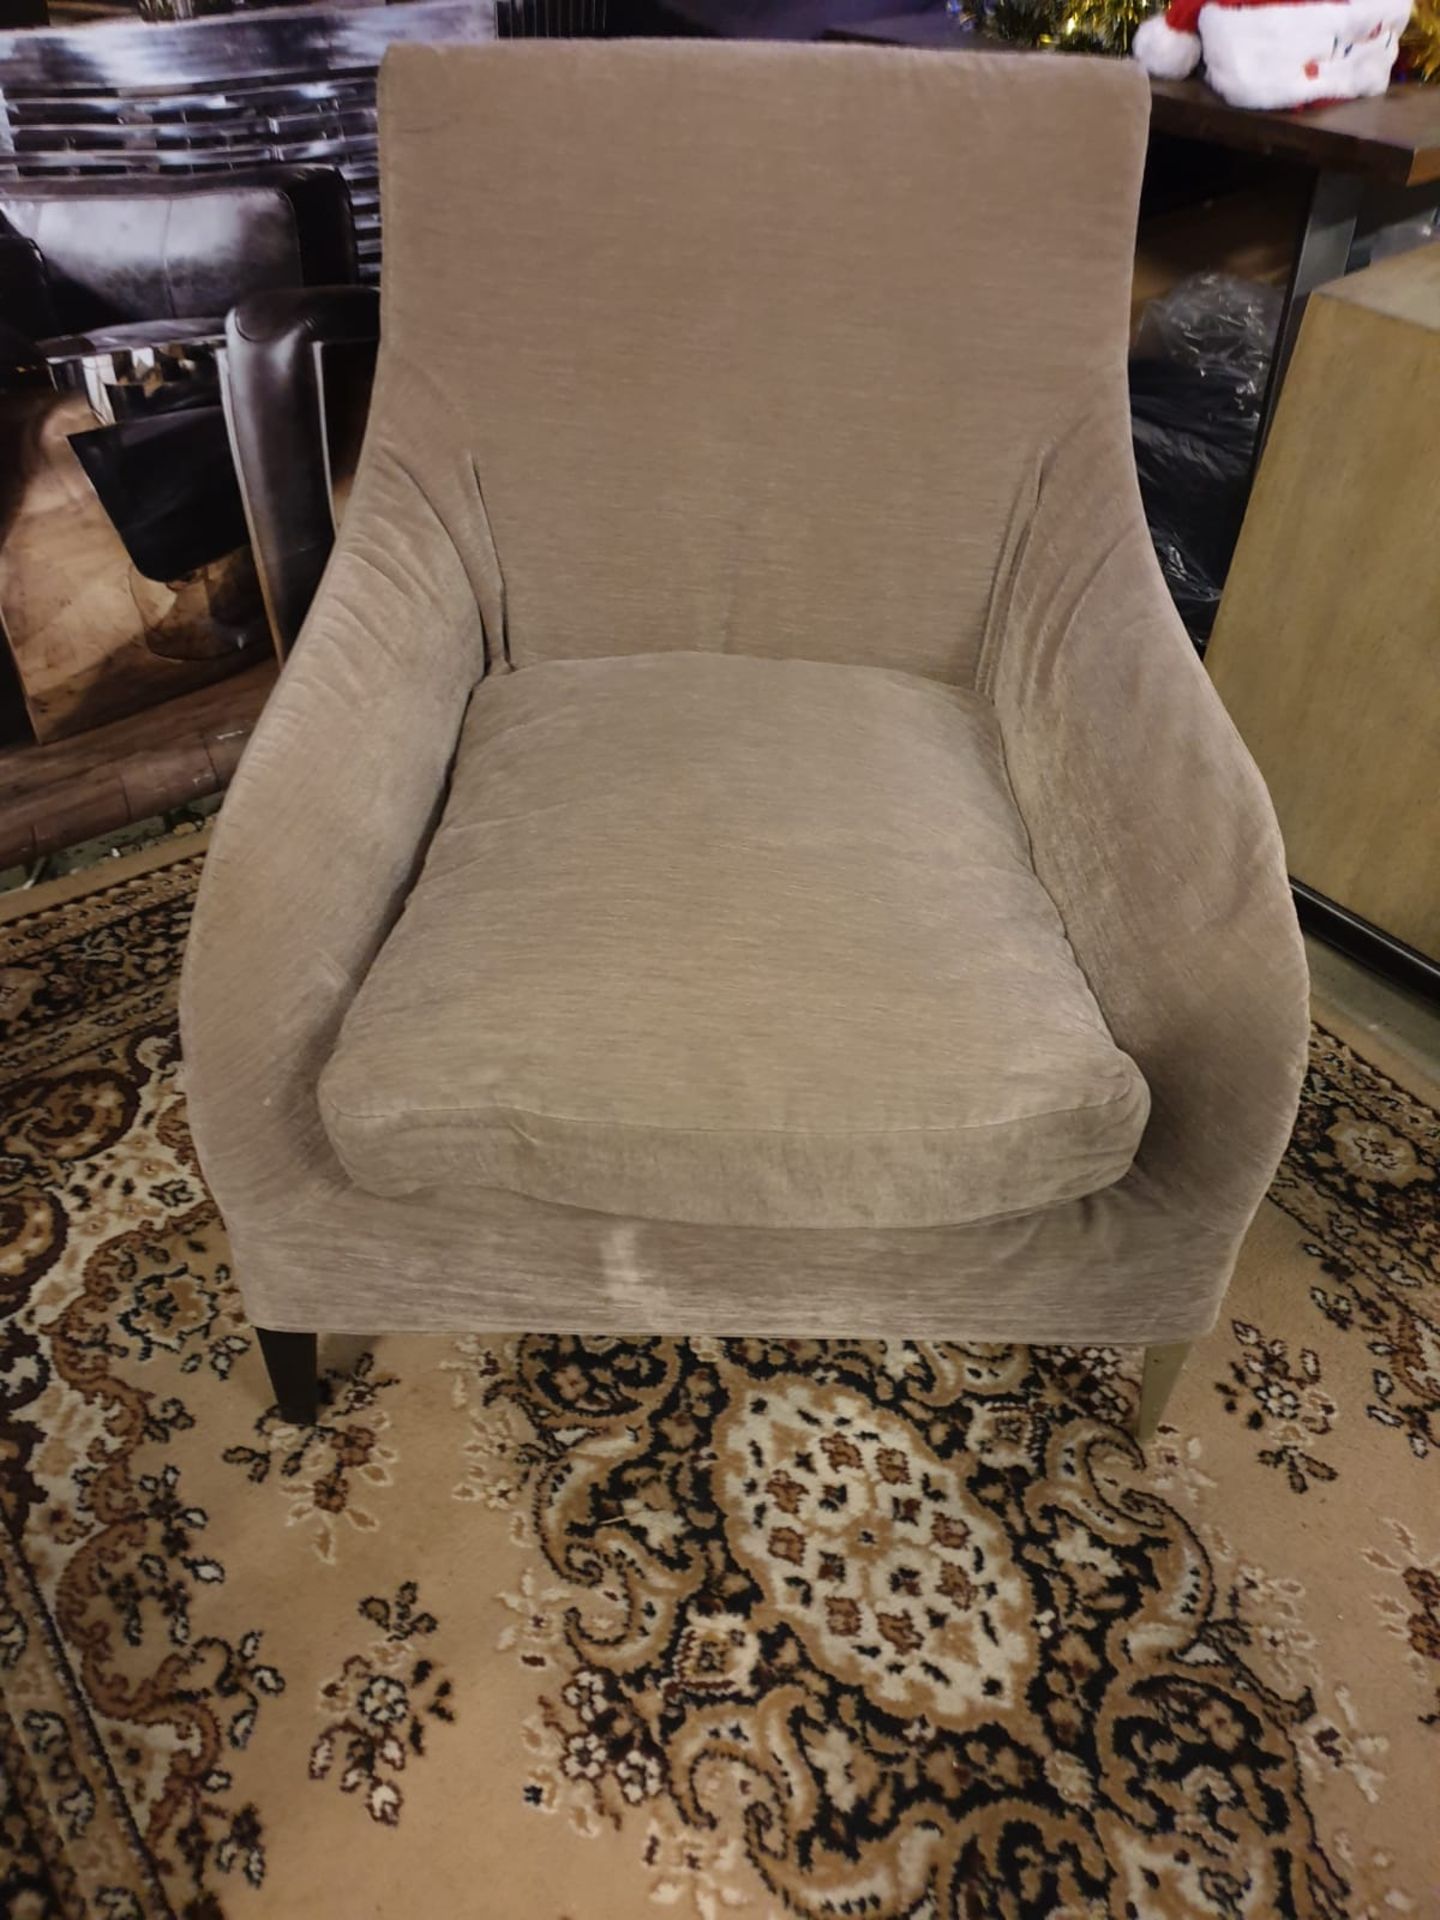 2 X Upholstered Luxury Chairs 1 X Brown Fabric Wingback Chair 72 X 55 X88cm 1 X Side Chair 74 X 56 X